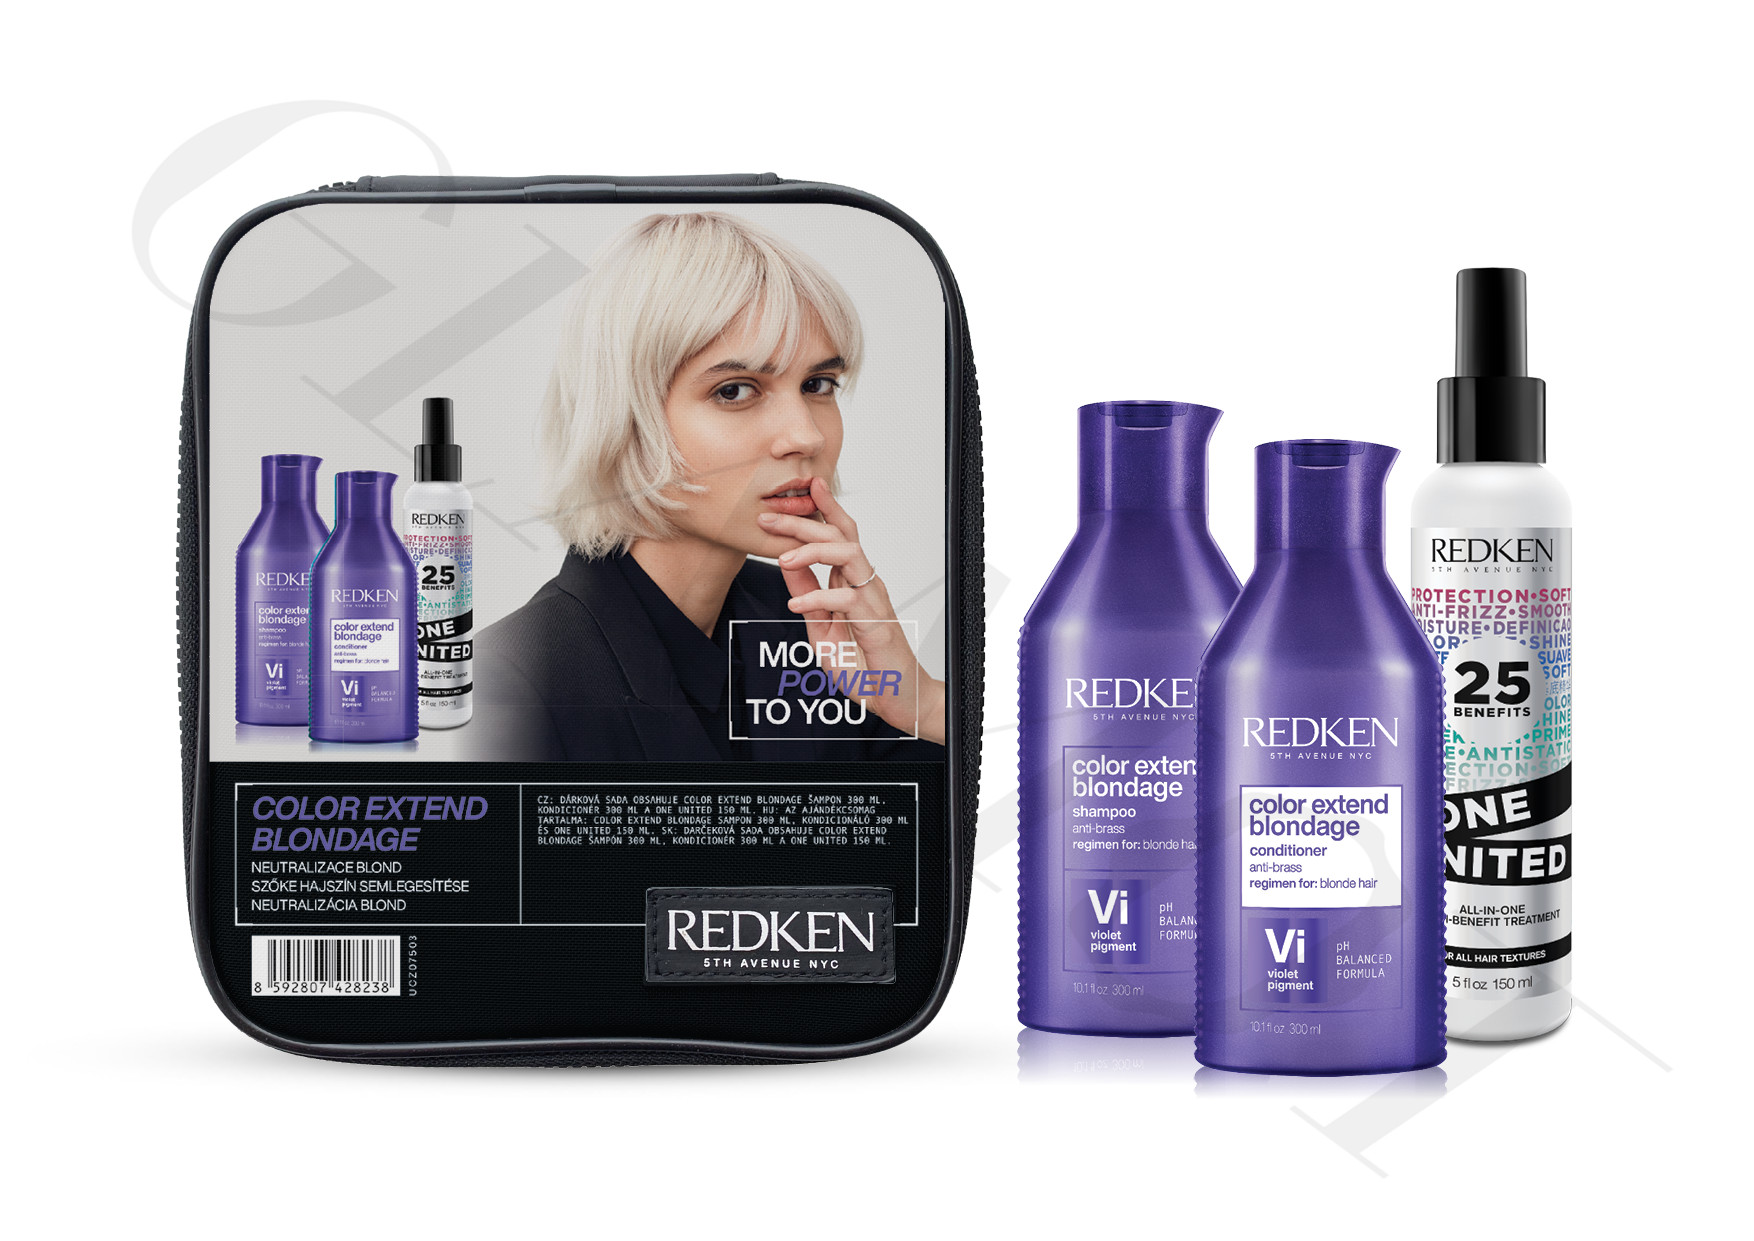 4. Redken Color Extend Blondage Shampoo and Conditioner - wide 4